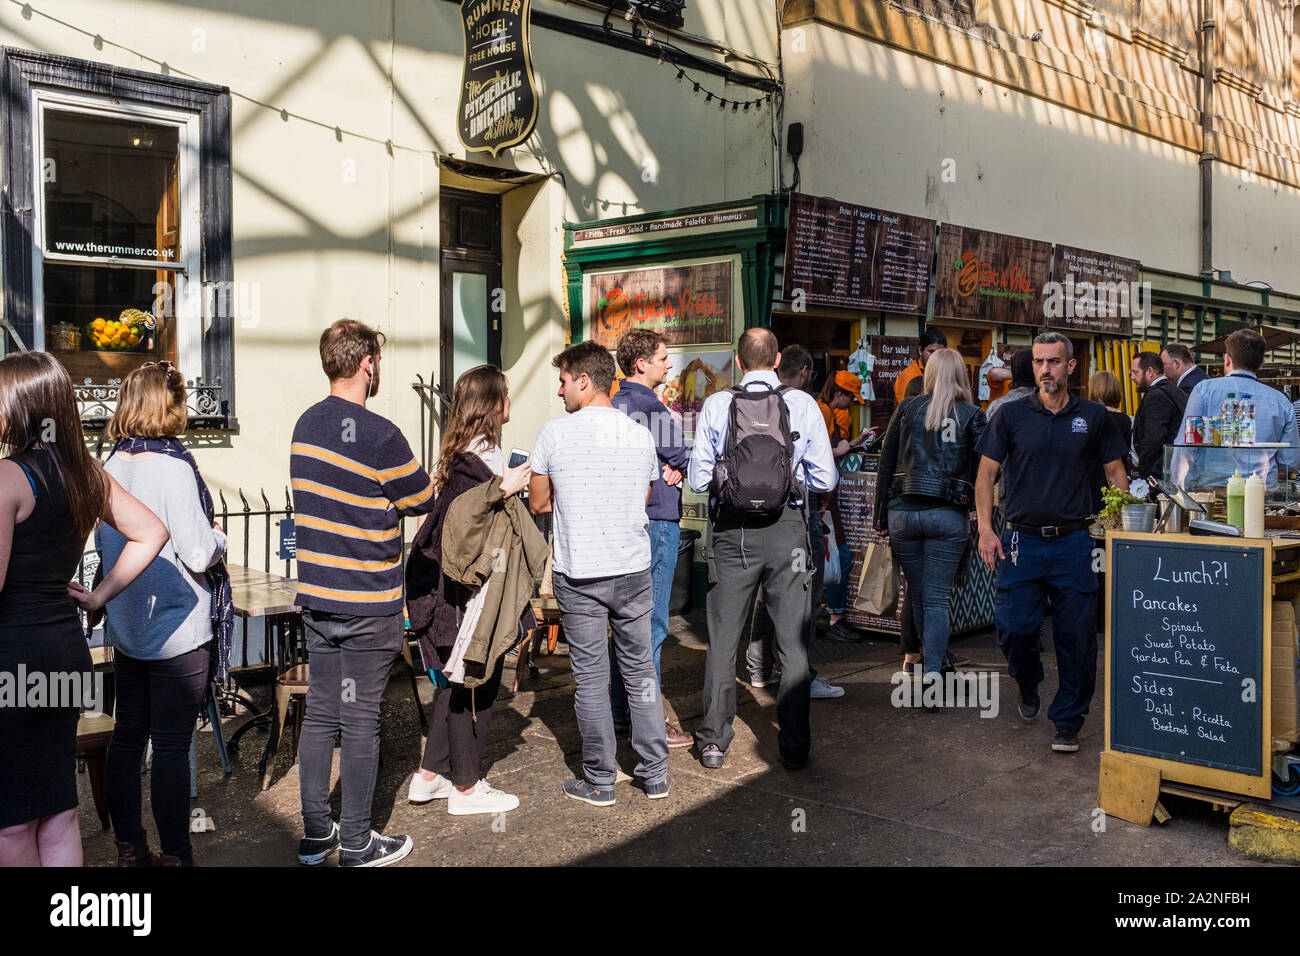 People queueing for takeaway at food stall, St Nicholas Market, Bristol, UK Stock Photo